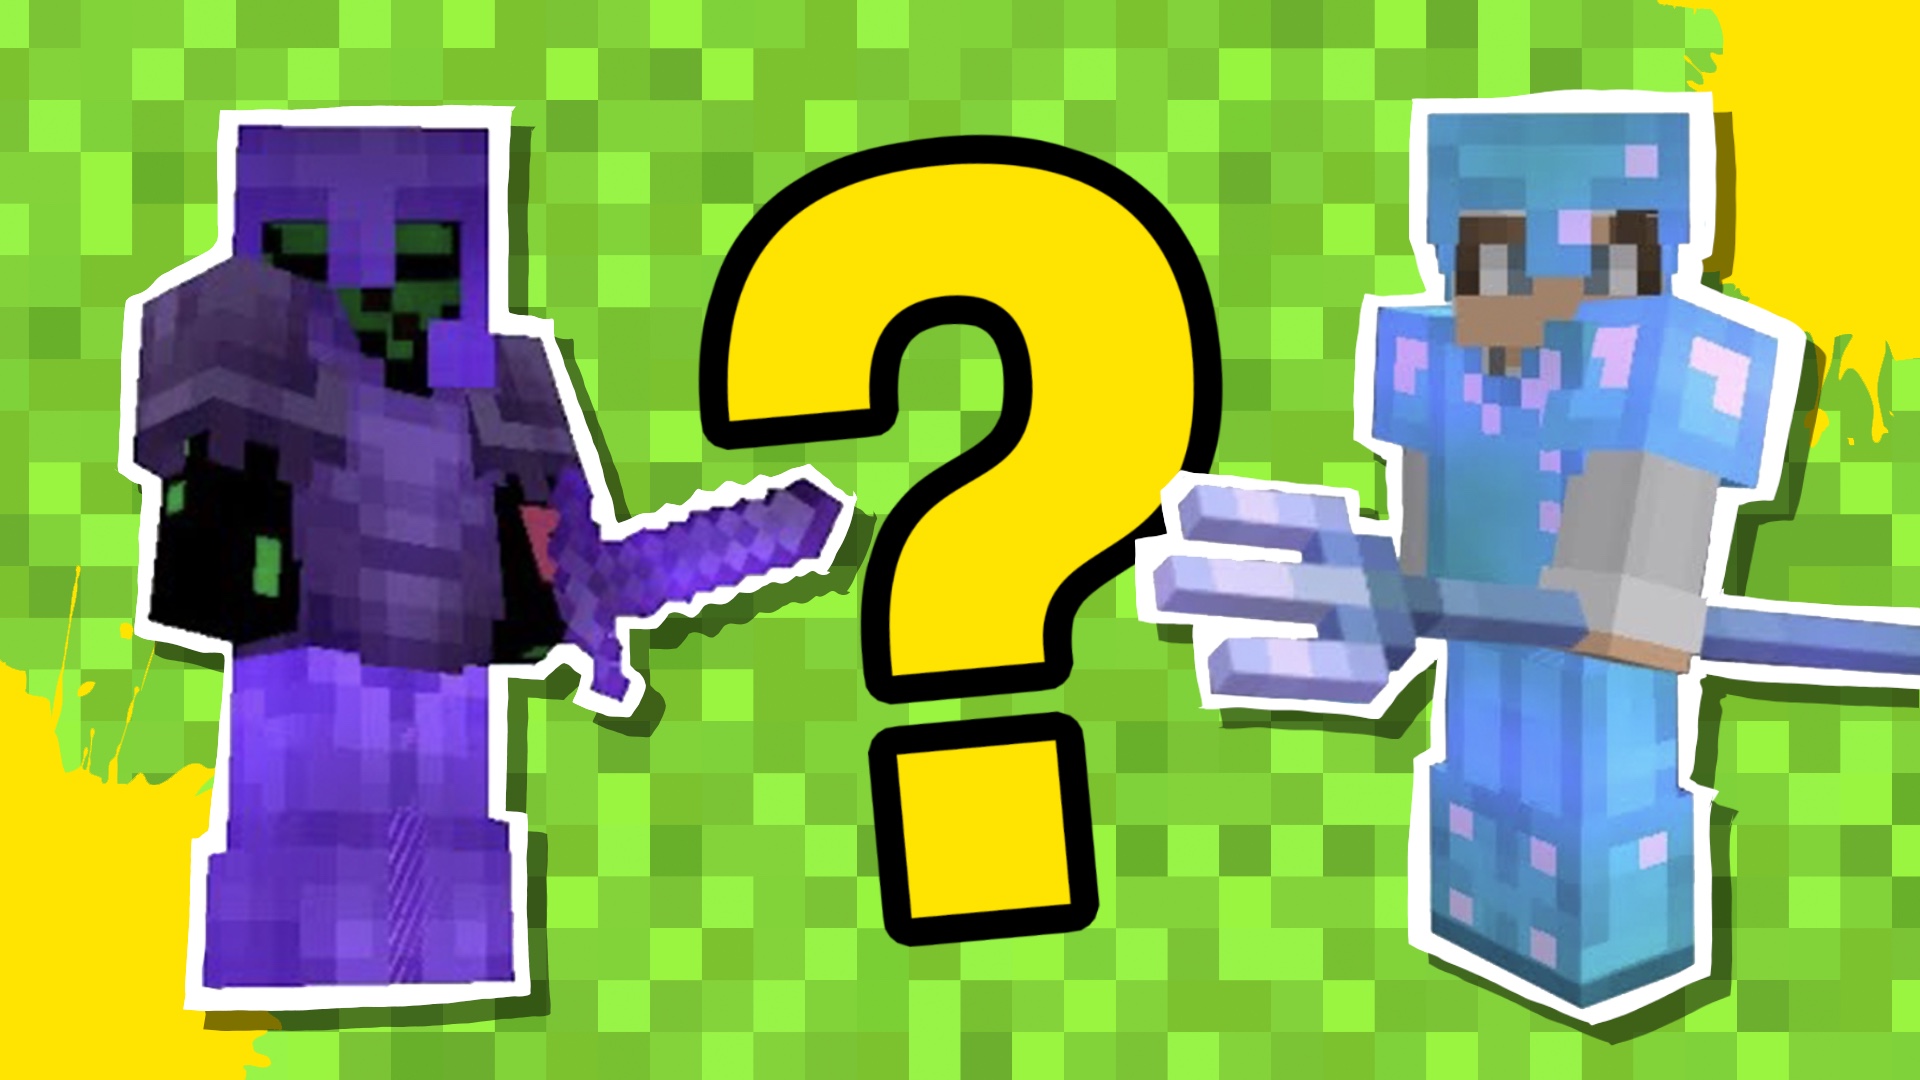 Name All The Minecraft Armor Enchantments!